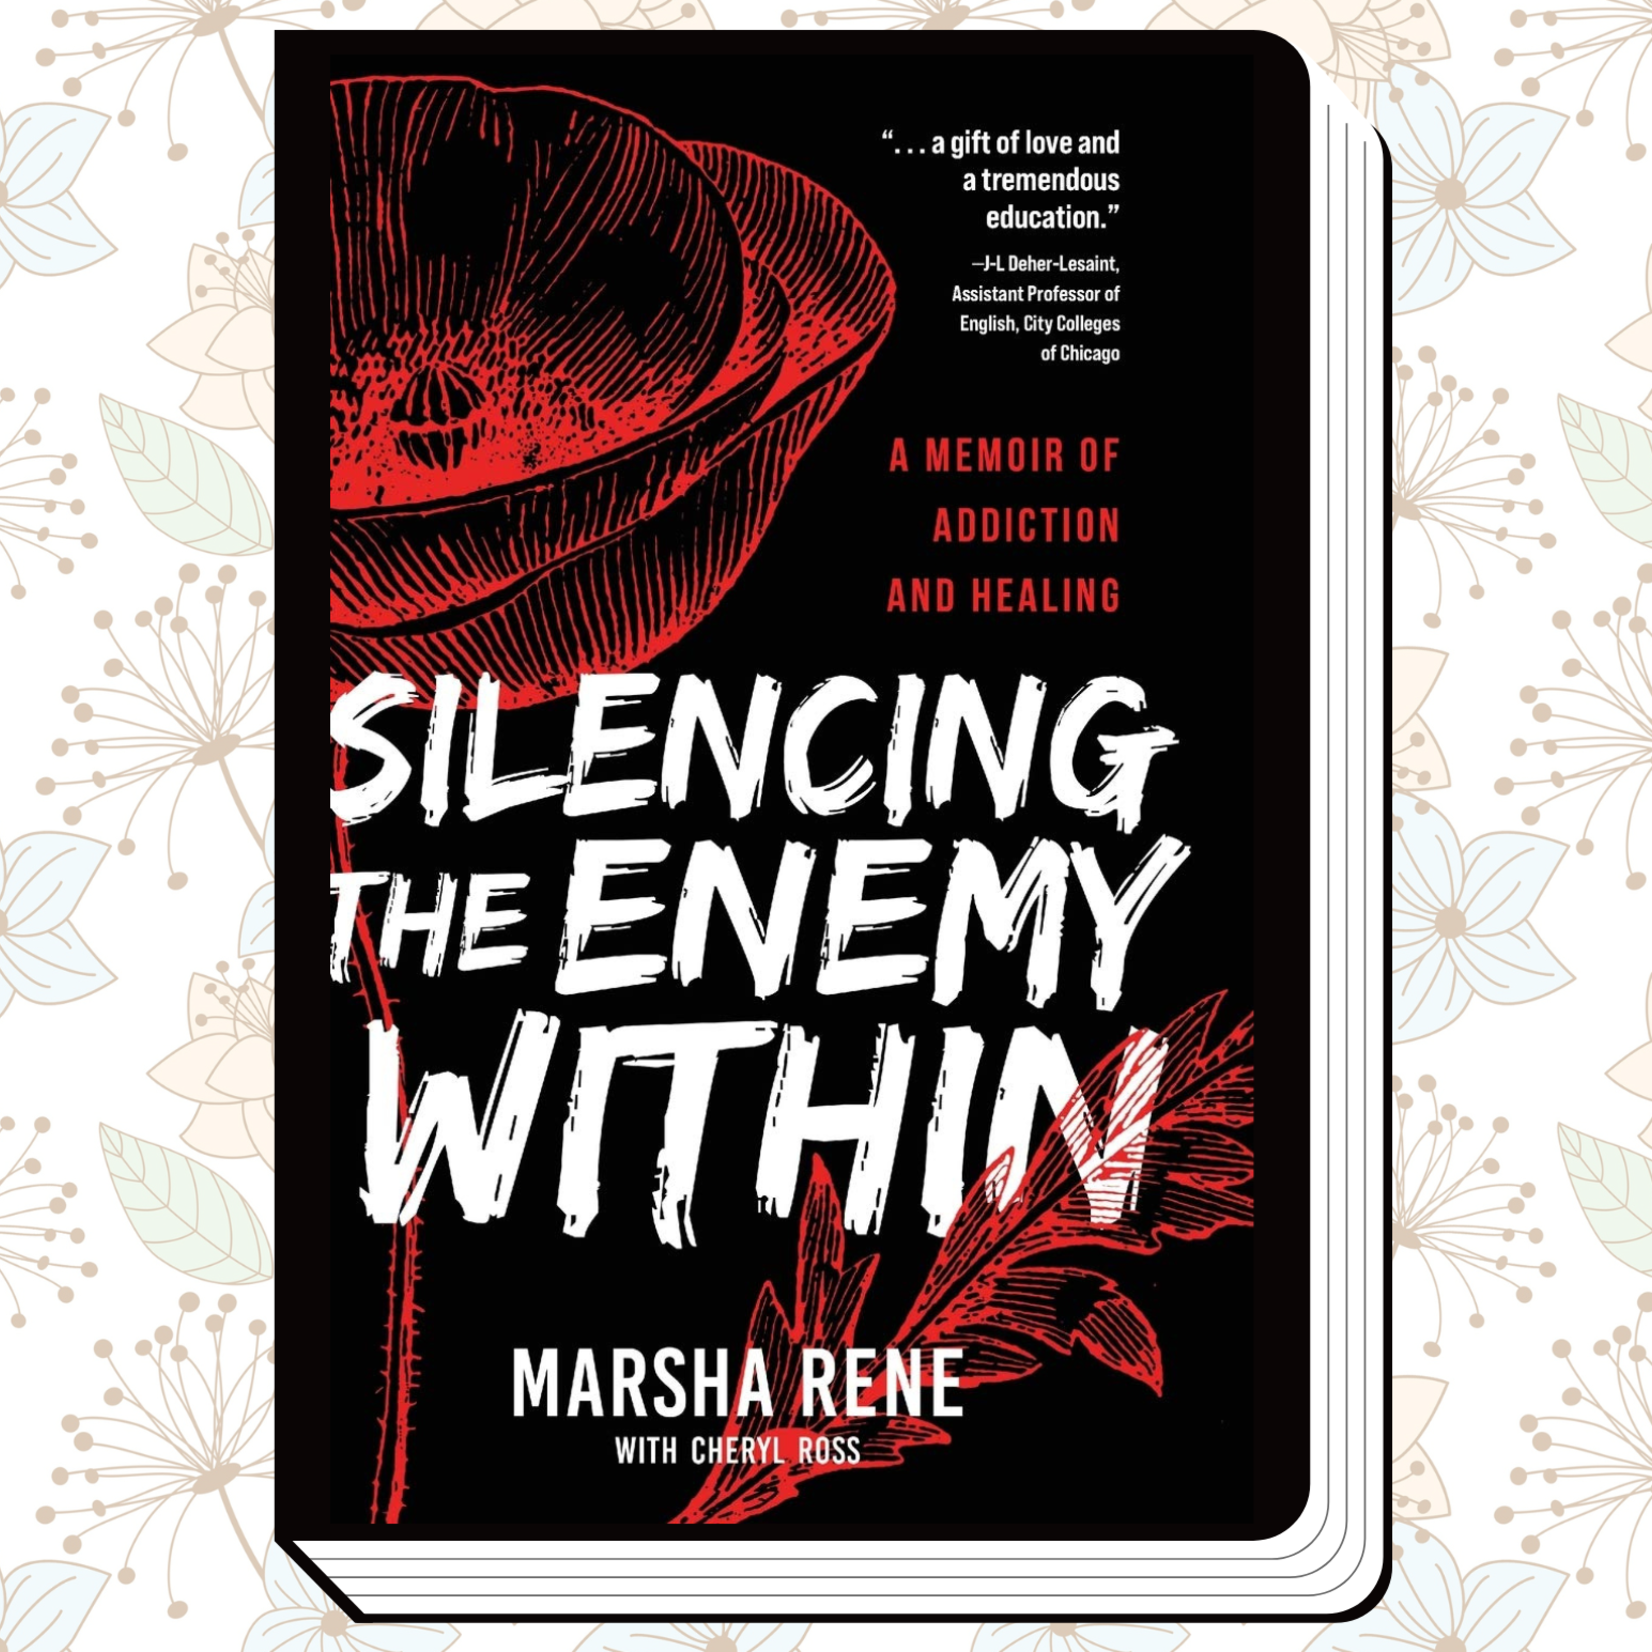 Silencing the Enemy Within [Memoir of Addiction & Healing]